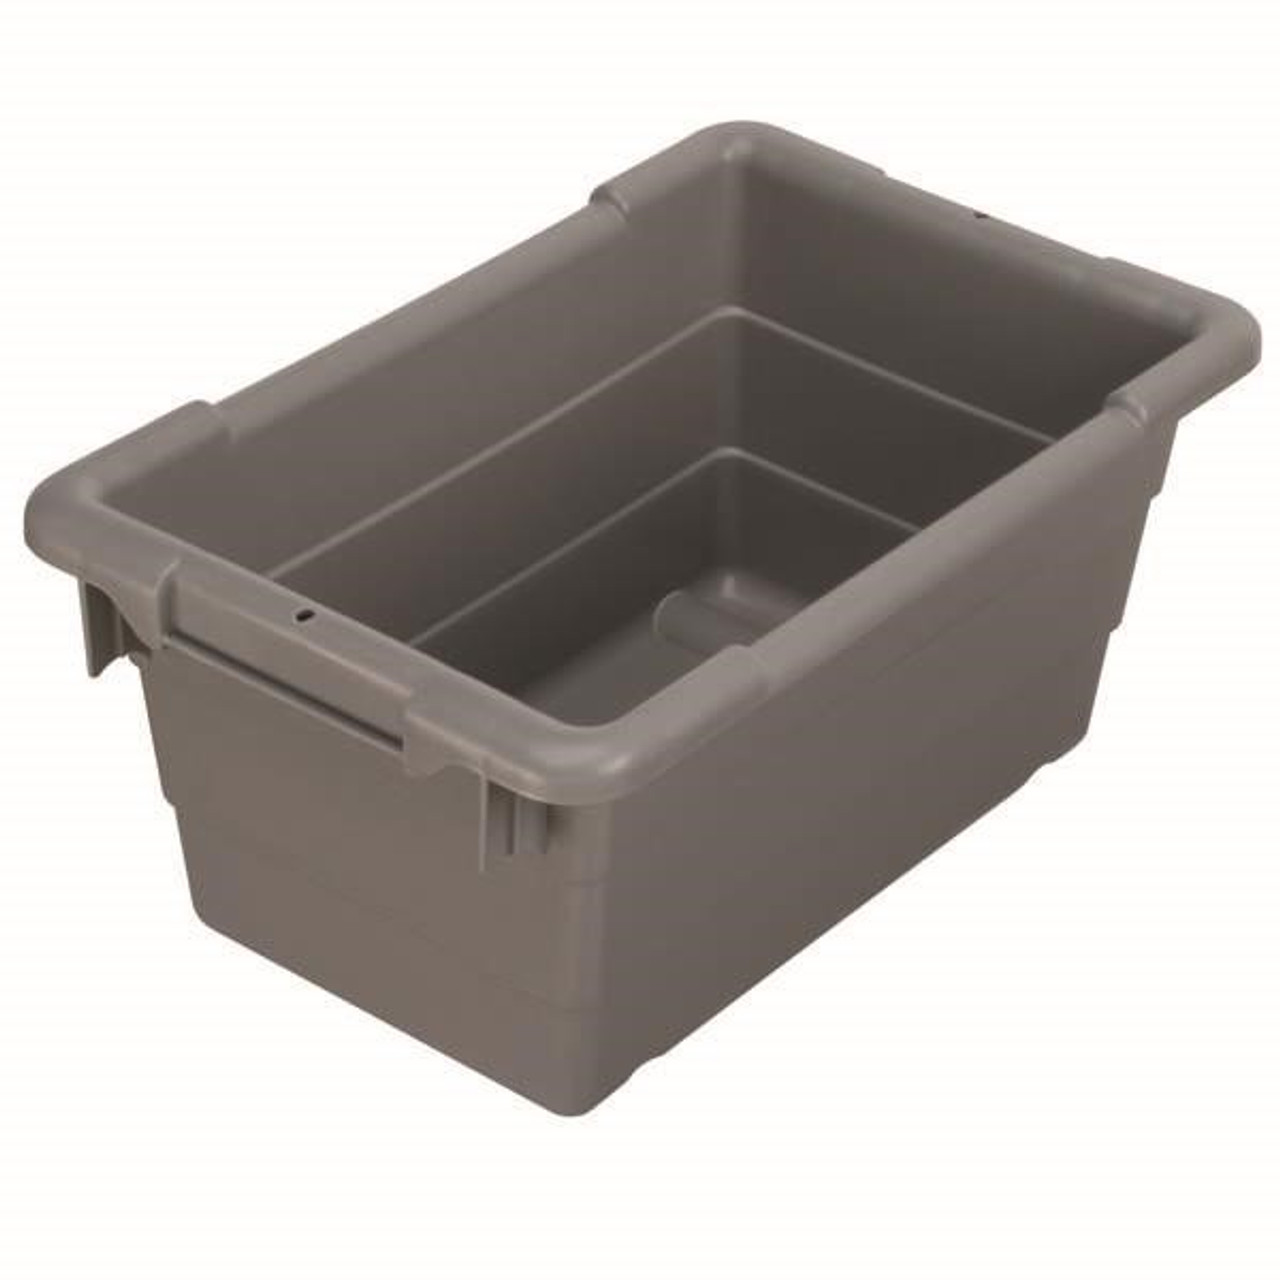 Akro-Tub Cross-Stack Container, 23 3/4L x 12H x 17 1/4W